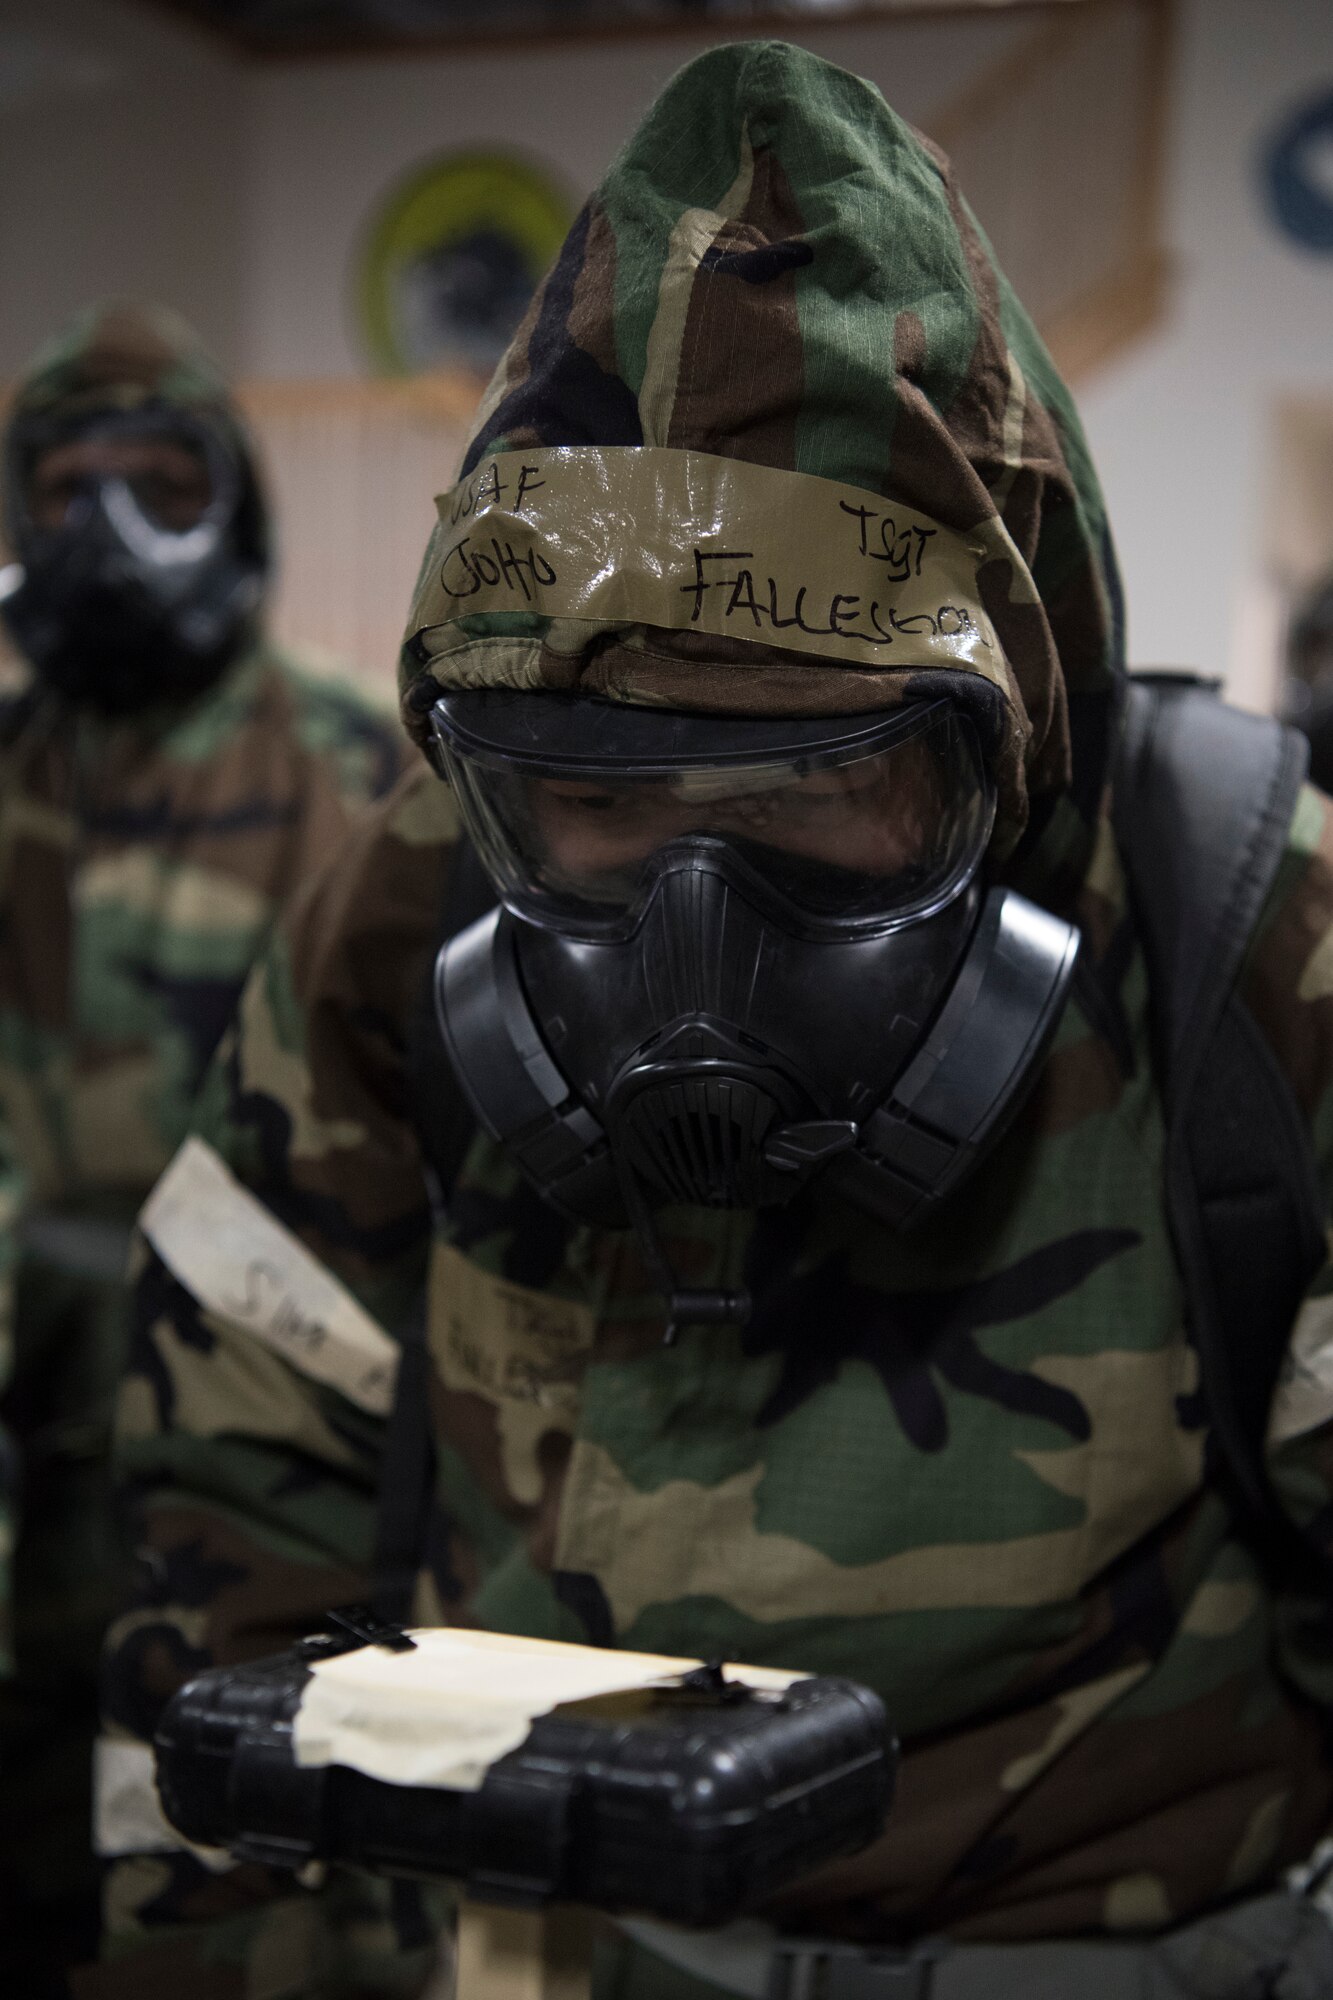 U.S. Air Force Tech. Sgt. John Fallesgon, 673d Force Support Squadron Fitness Assessment Cell noncommissioned officer in charge, evaluates M-8 paper during a newly-implemented chemical, biological, radiological and nuclear defense training course at Joint Base Elmendorf-Richardson, Alaska, Jan. 8, 2019. One of the key changes made embraces the reintegration of hands-on, in-person instruction, and reduces computer based training, allowing Airmen to receive a more tailored learning experience. (U.S. Air Force photo by Airman 1st Class Crystal A. Jenkins)